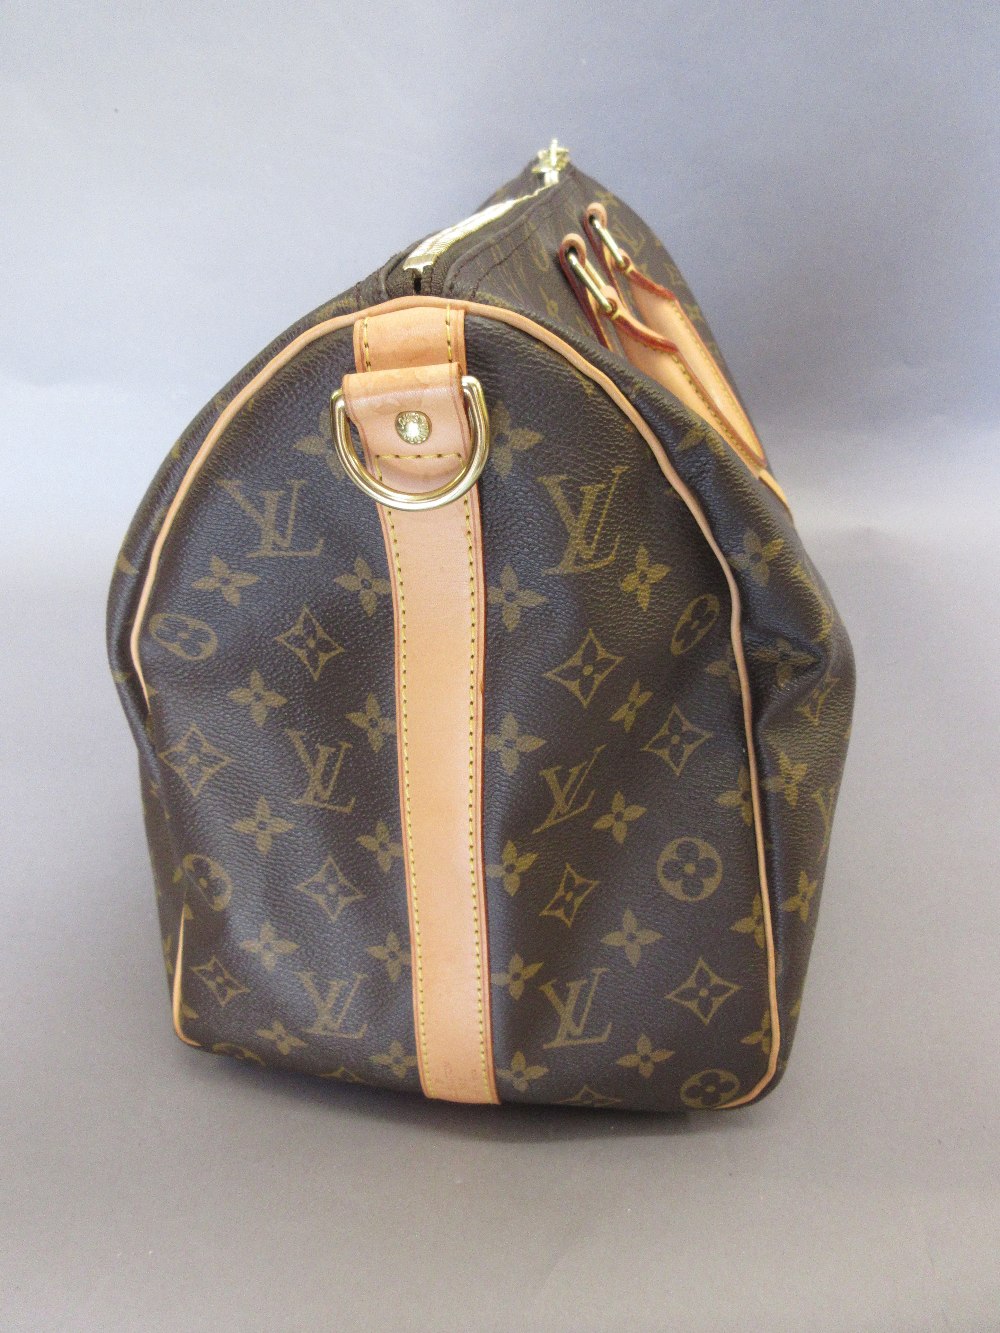 Louis Vuitton light brown leather and monogrammed holdall type bag - Image 2 of 7